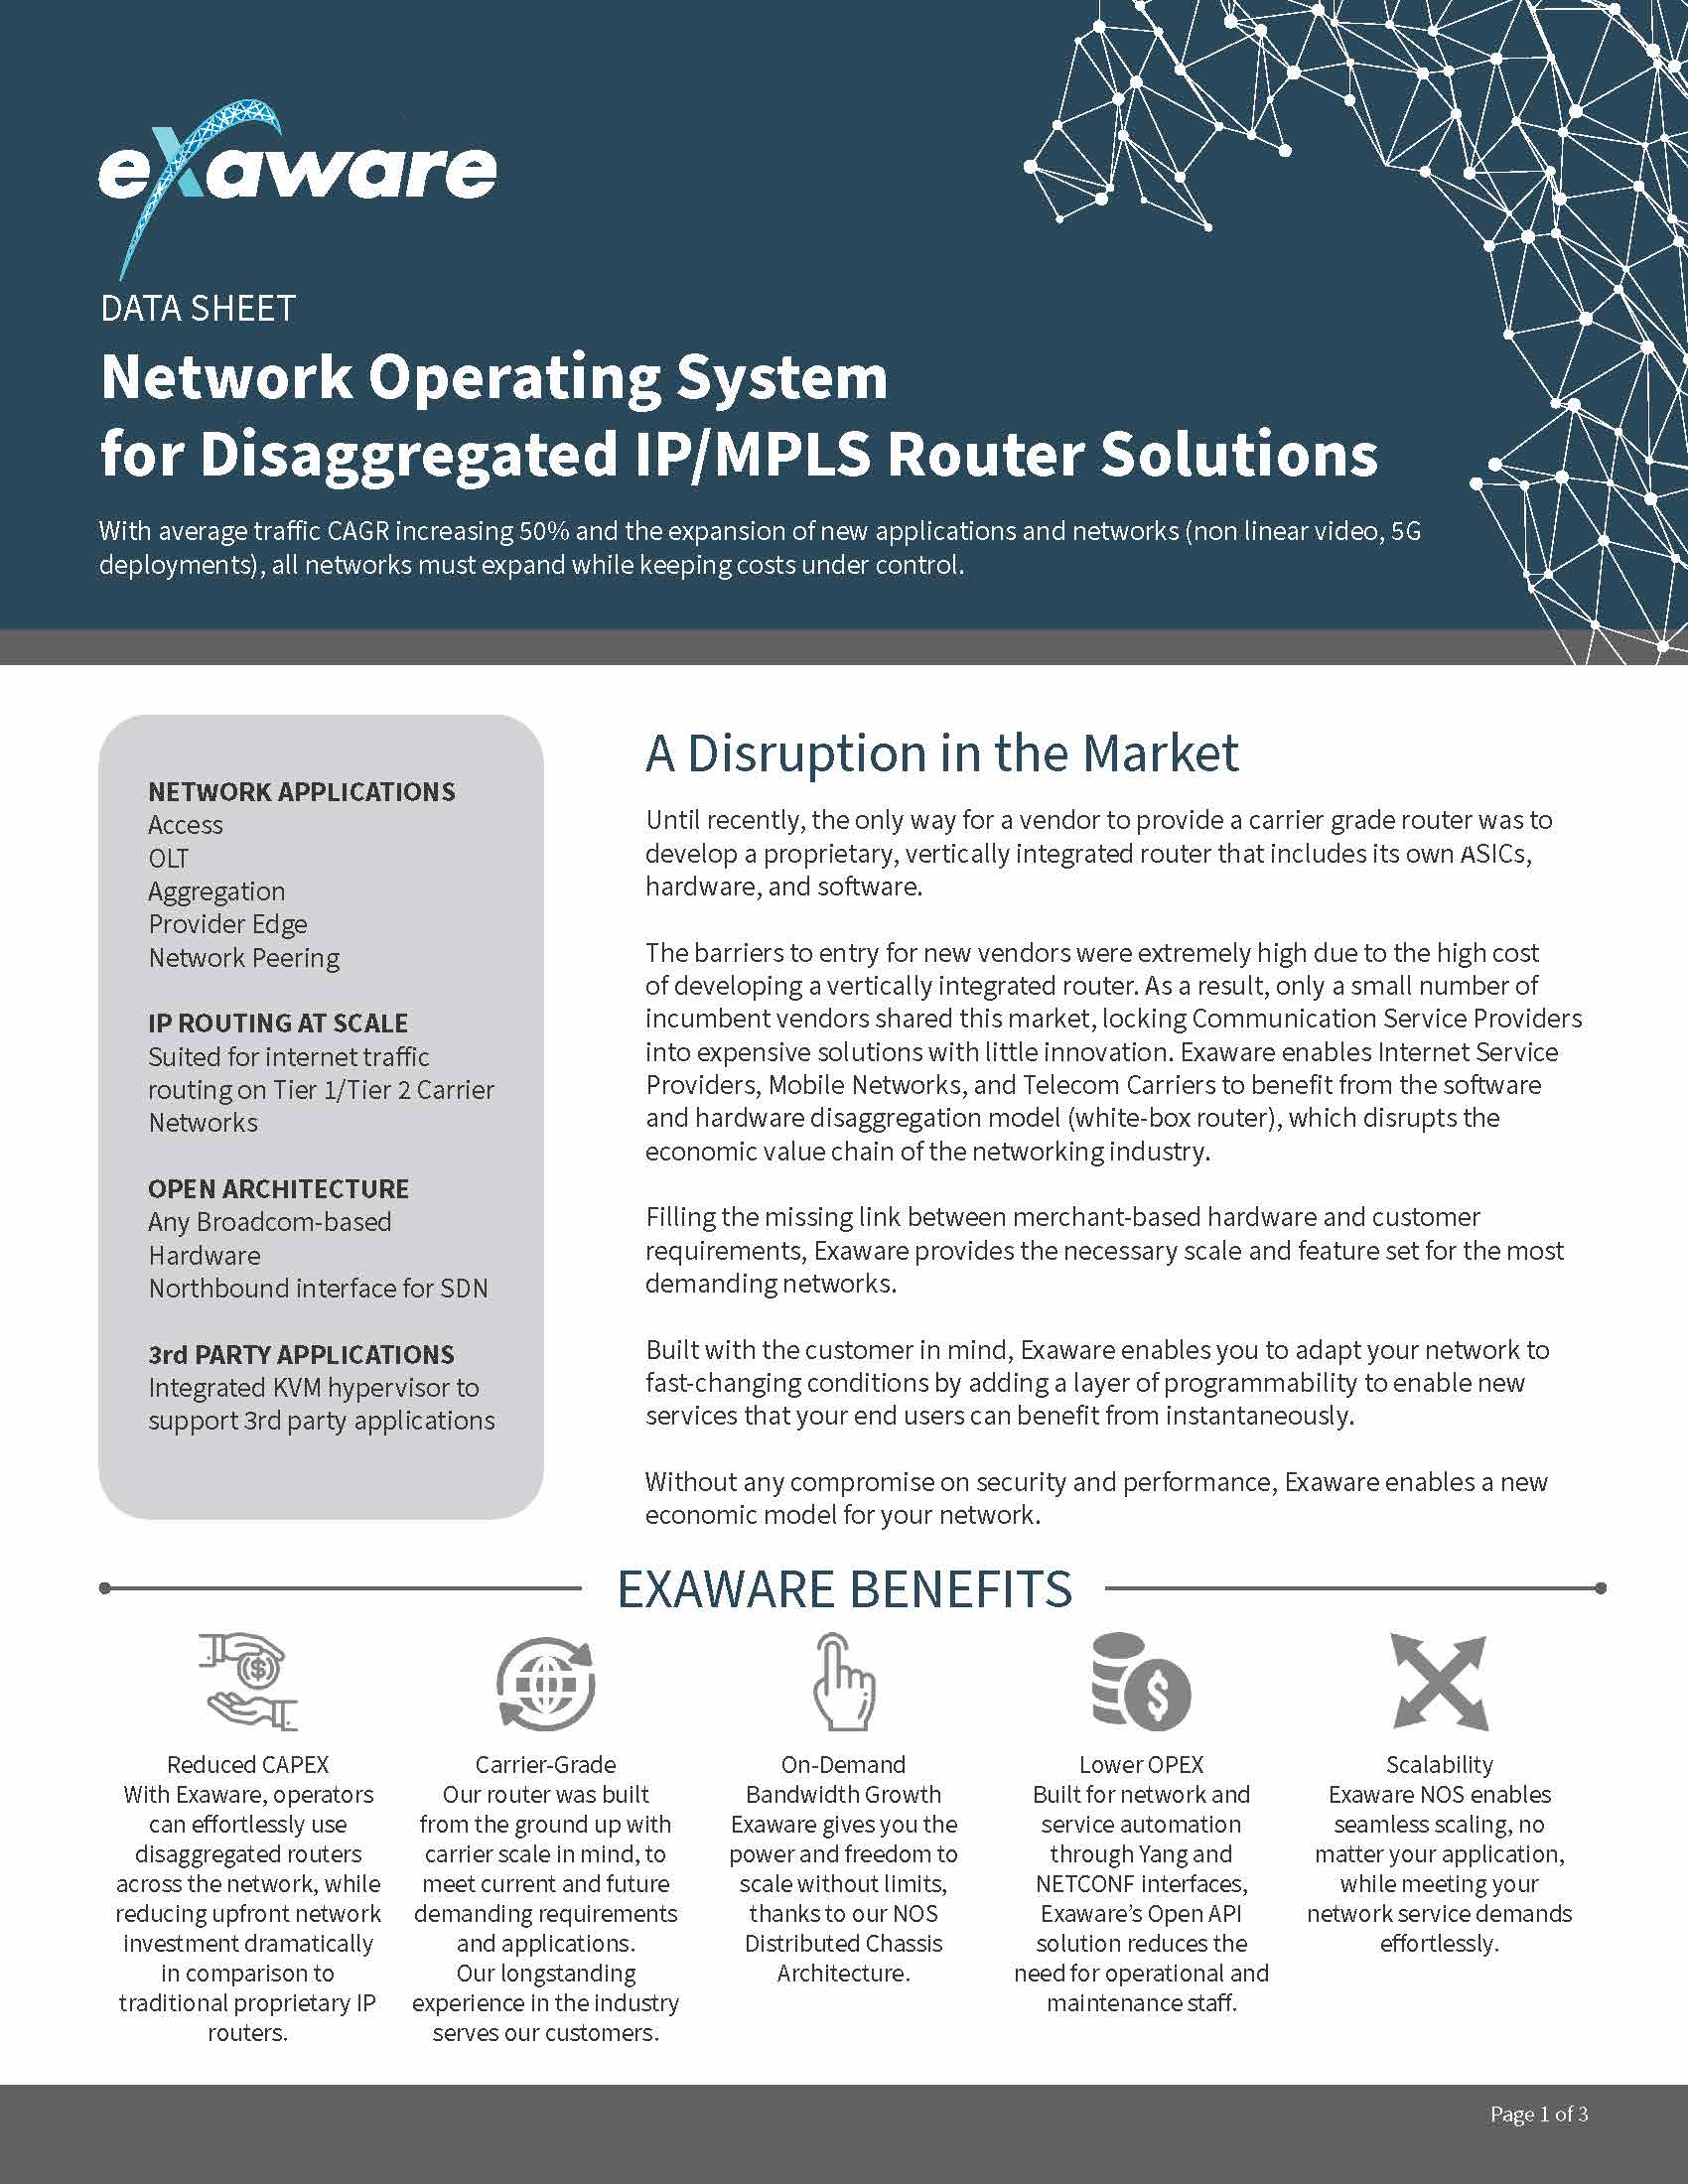 Disaggregated network operating system